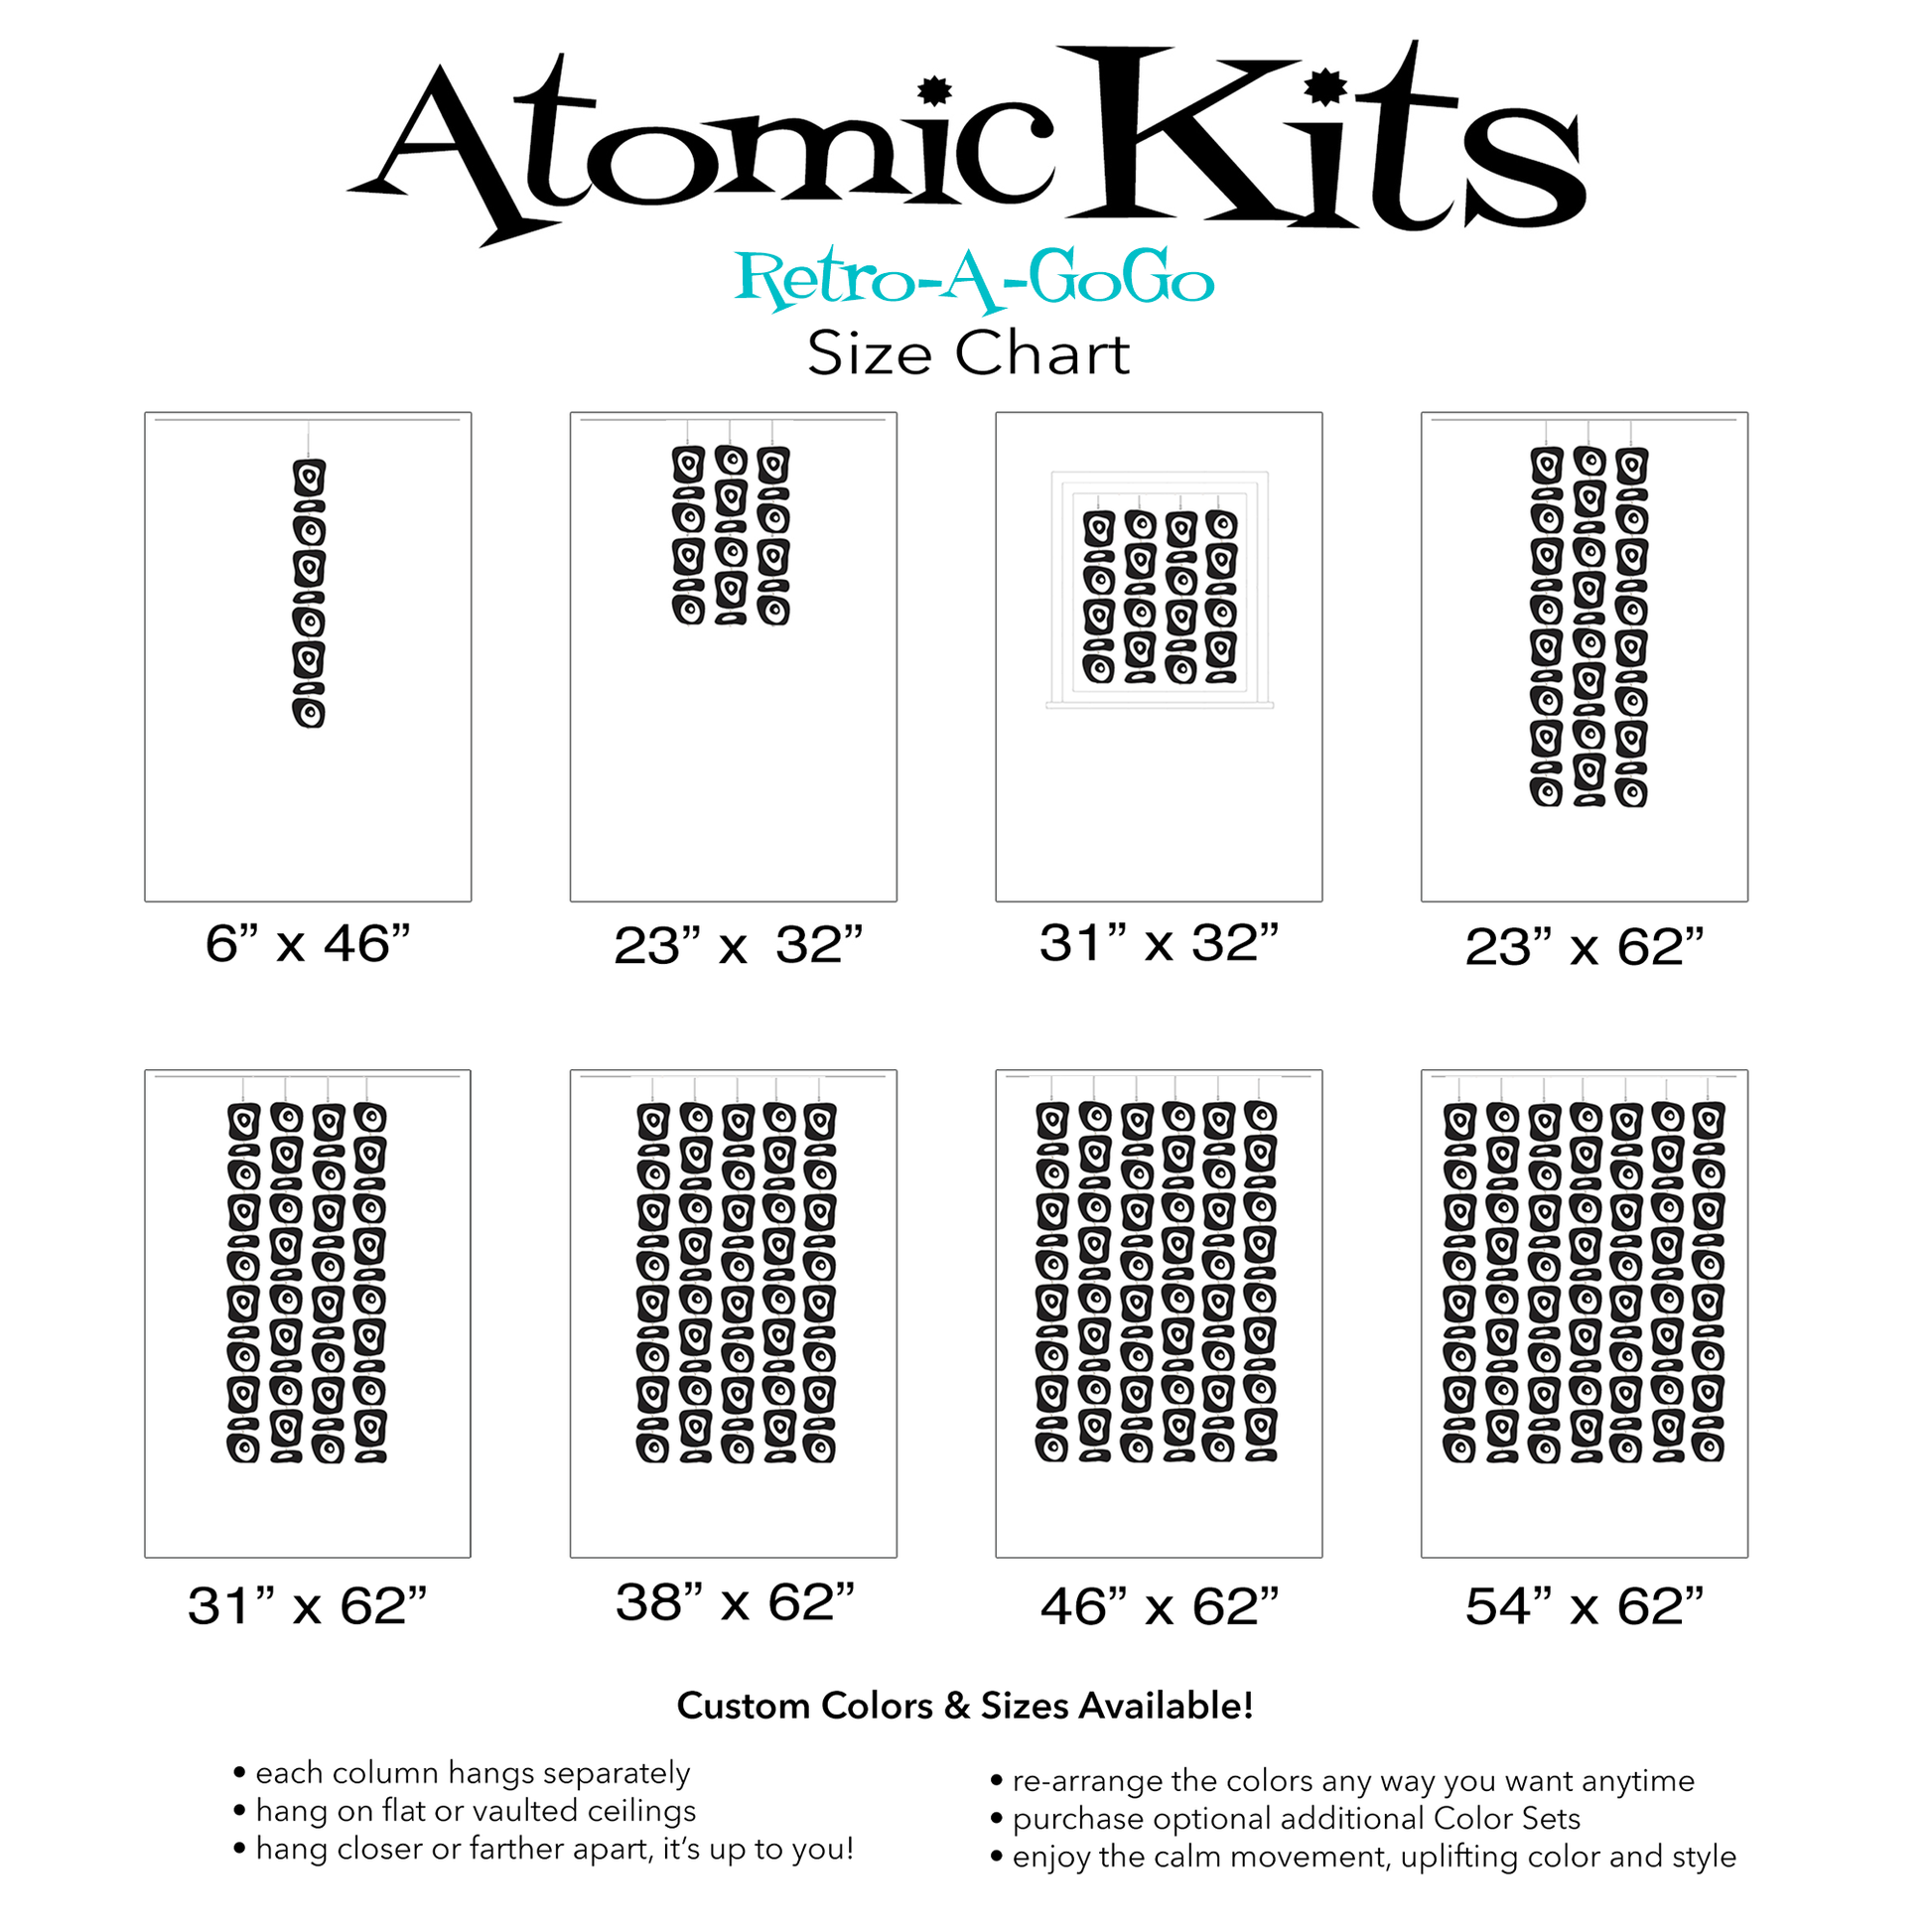 Size Chart for Retro-A-GoGo Style Atomic Kits to make hanging mobiles, curtains, and room dividers in mid century modern decor by AtomicMobiles.com